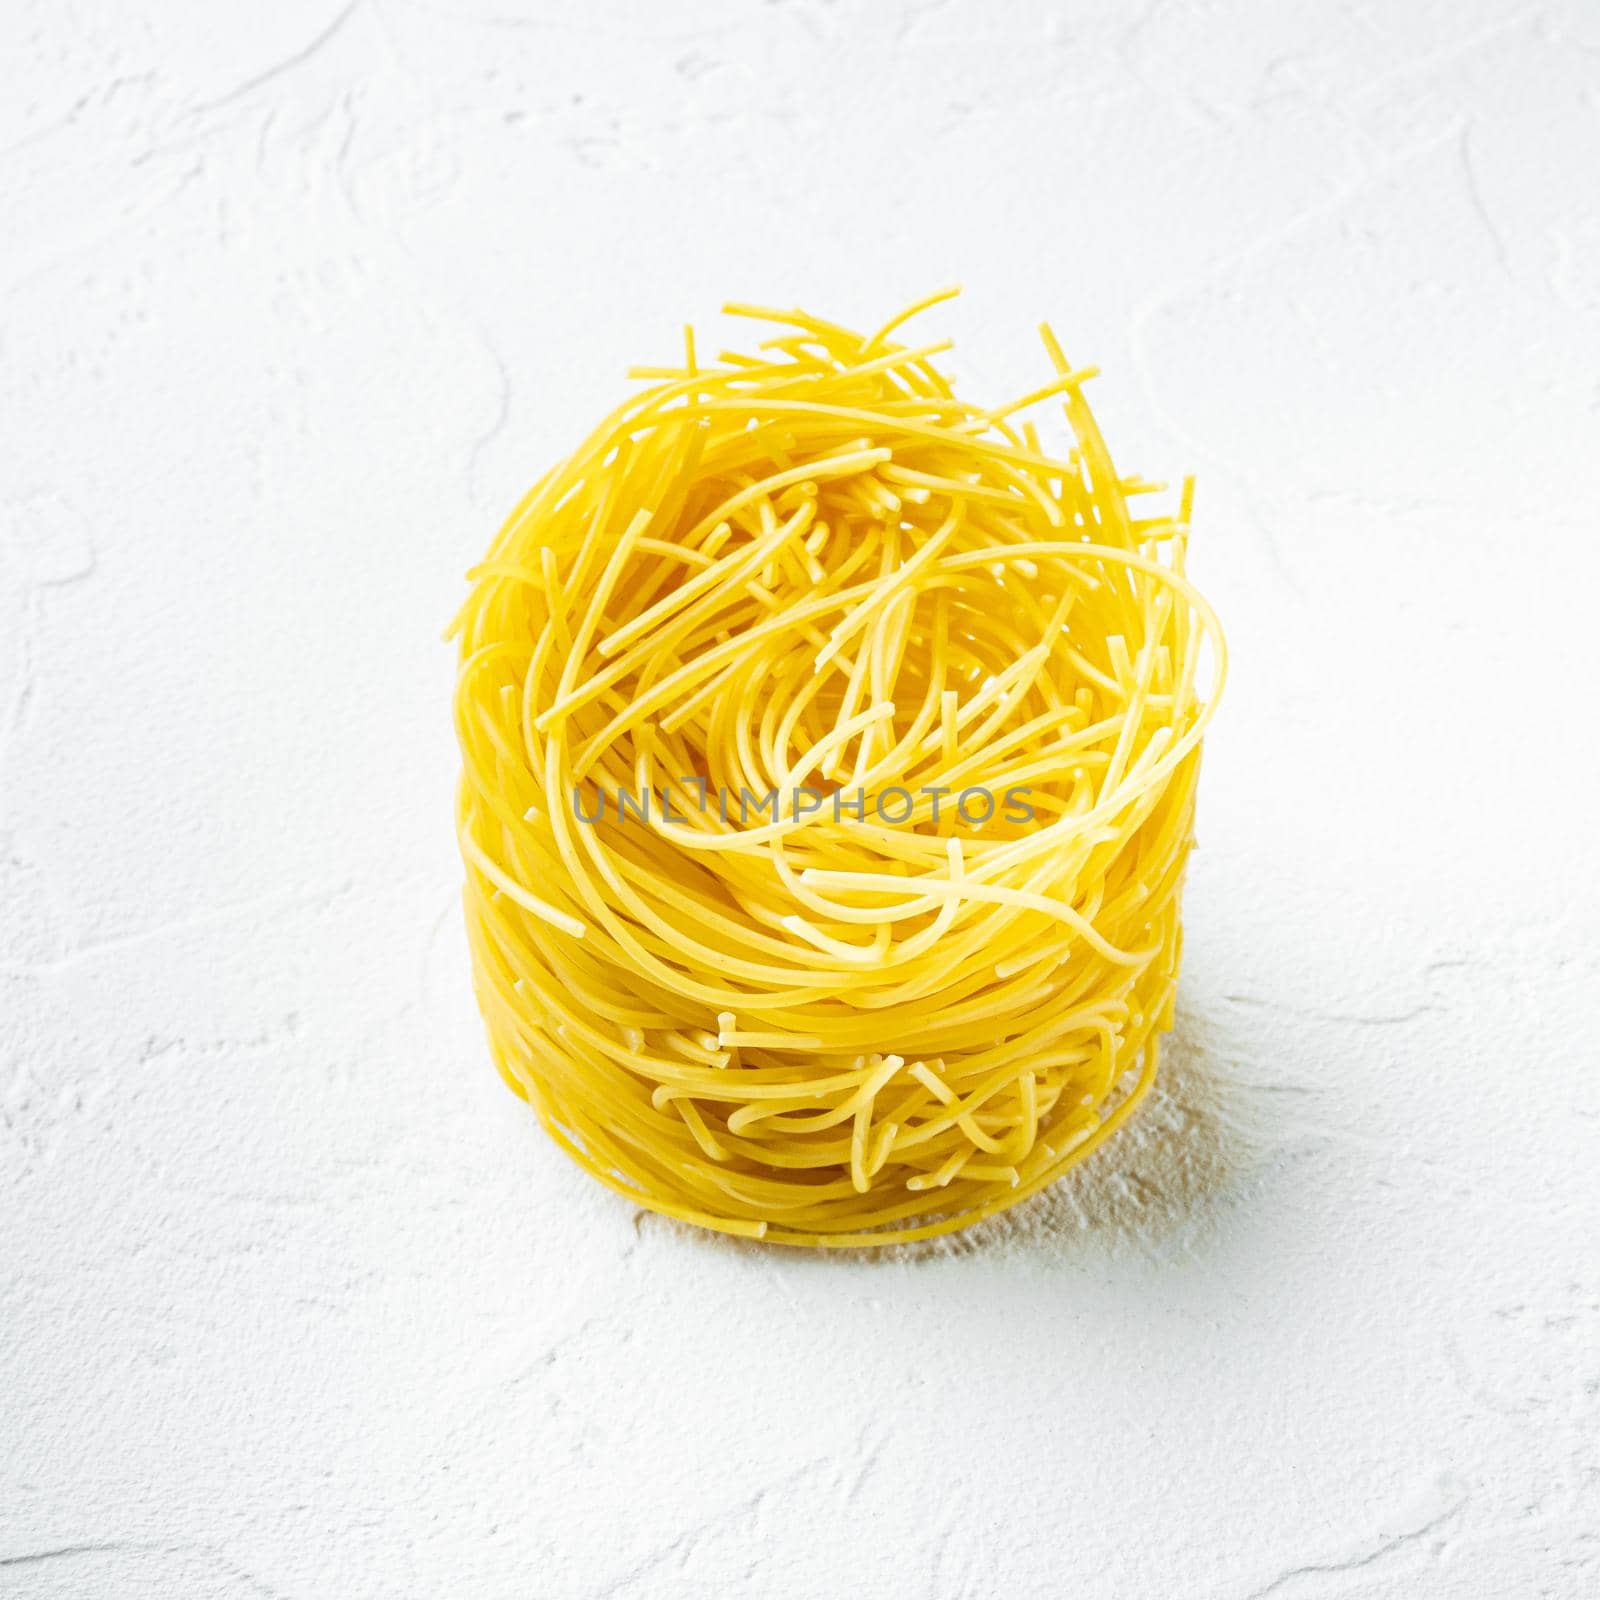 Dried taglierini , on white stone surface, square format by Ilianesolenyi